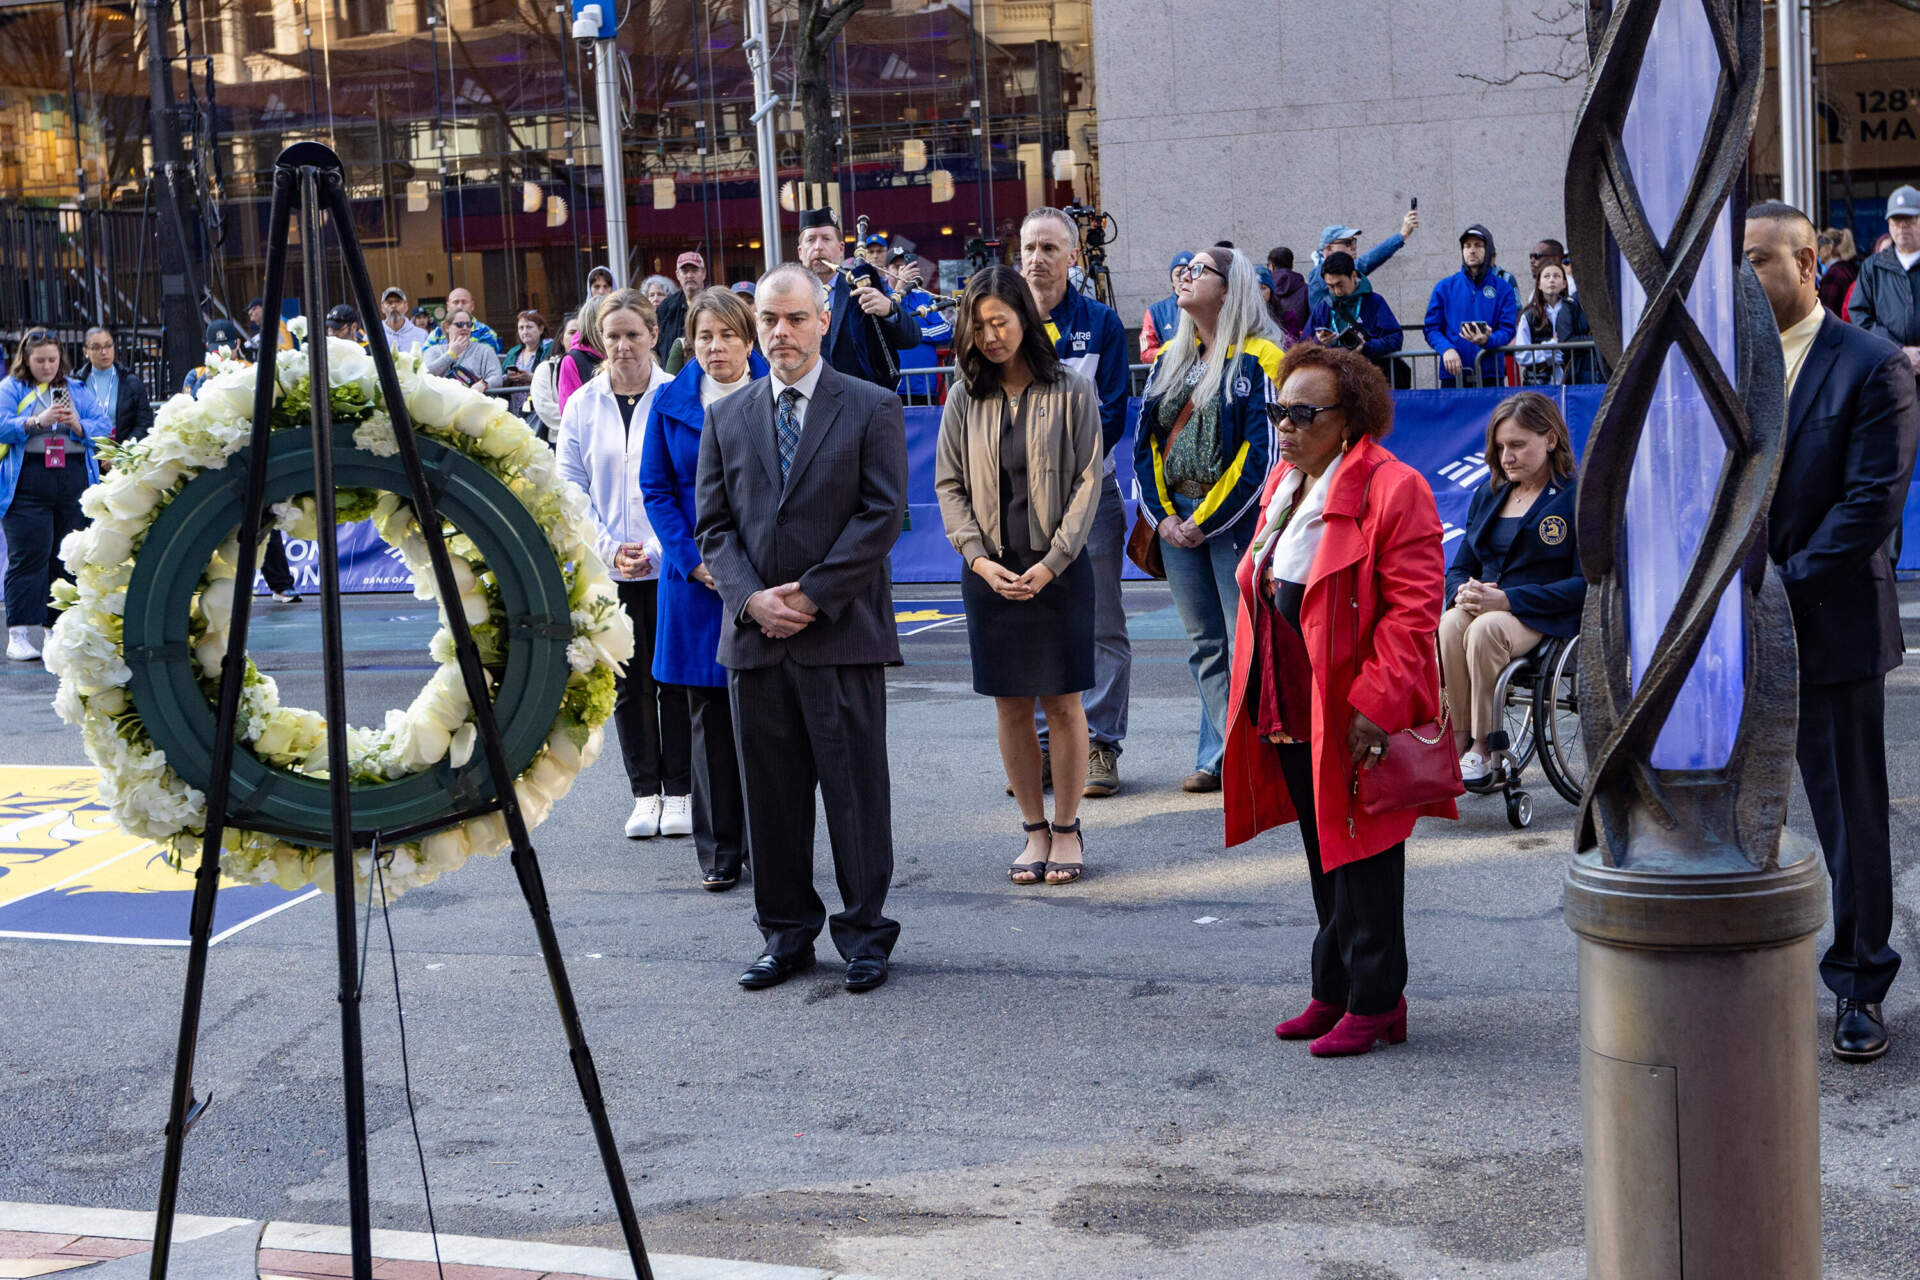 Gov. Healey, Mayor Wu and family of the victims pause for a moment of silence at the memorial on Boylston Street in Boston. (Jesse Costa/WBUR)